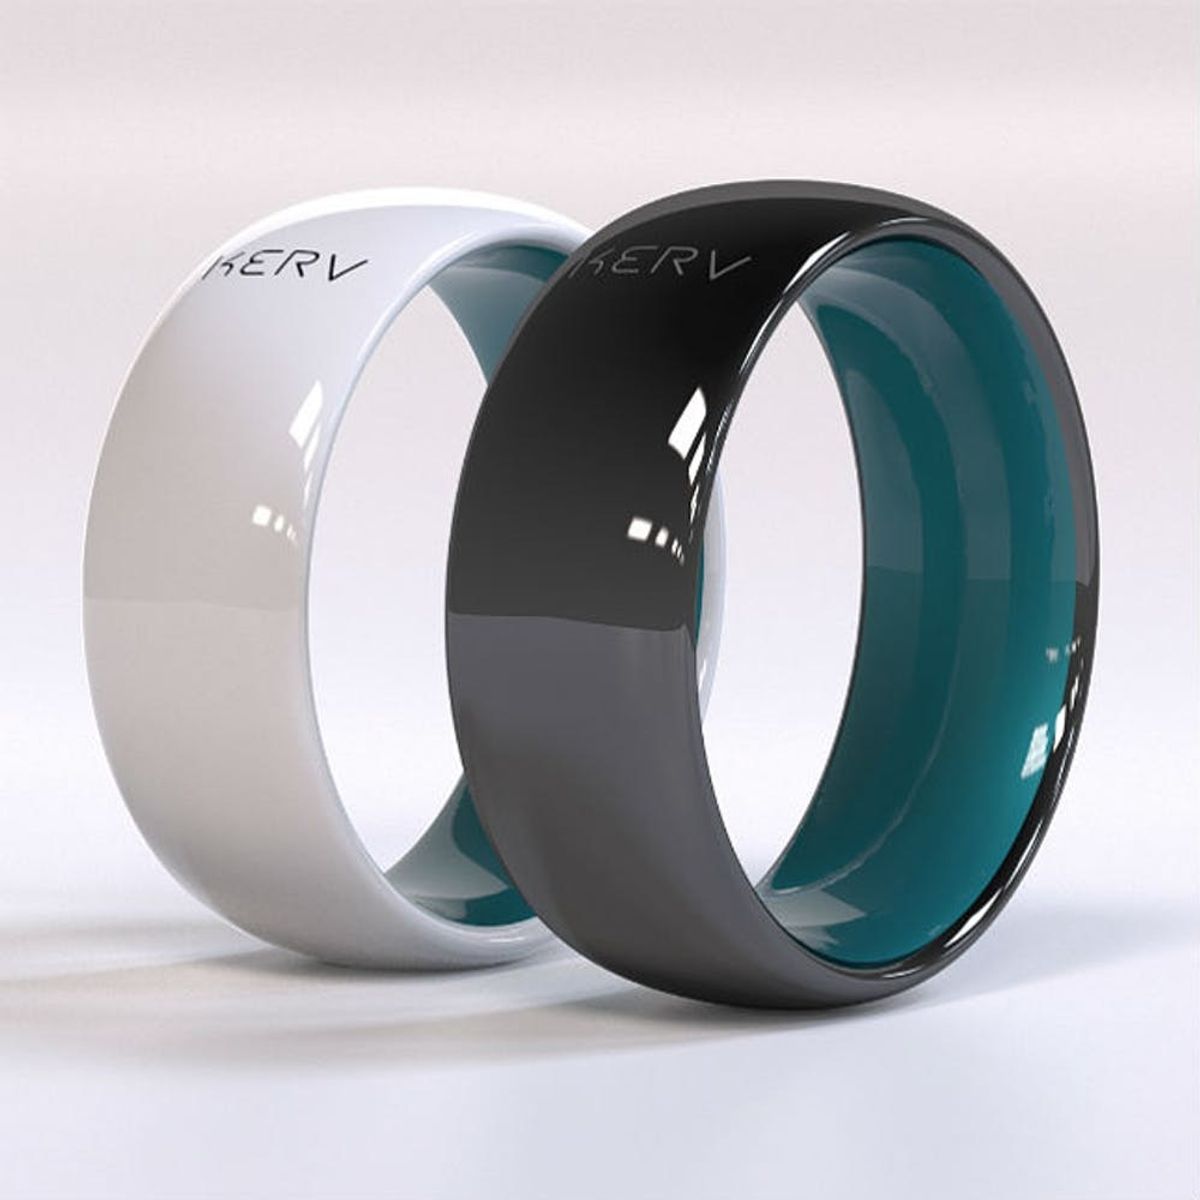 This Smart Ring Will Make Shopping So Much Better